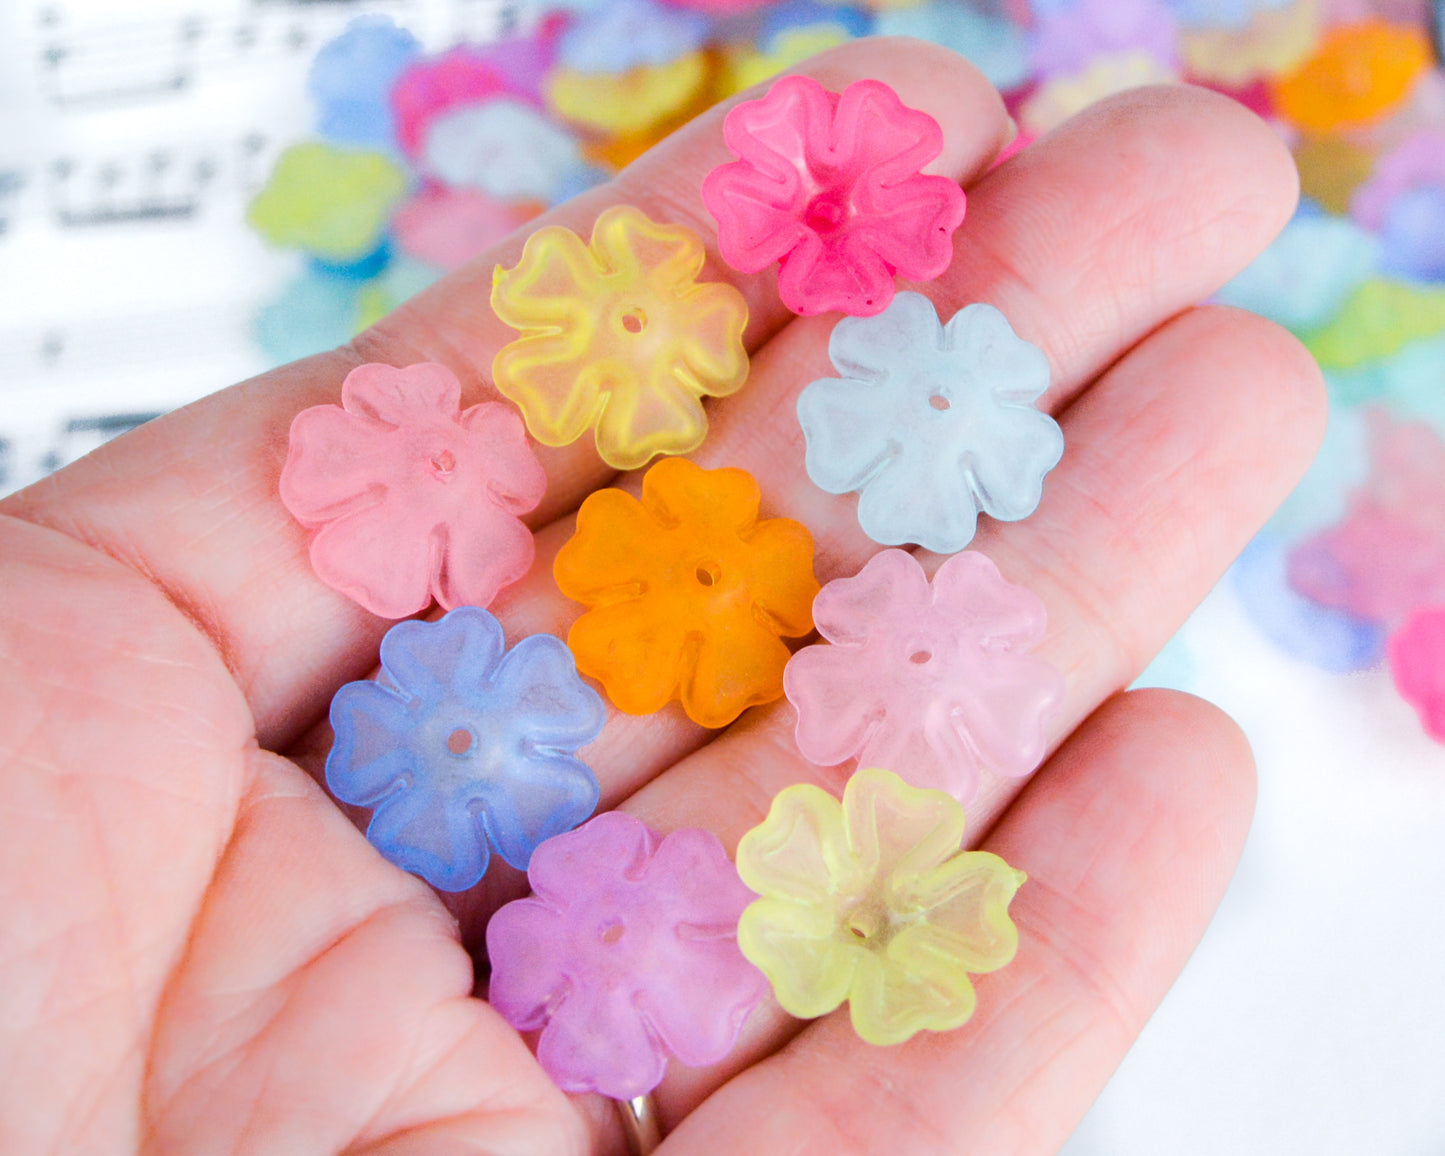 6x16mm Puckered Frosted Flower Beads in Colorful Acrylic